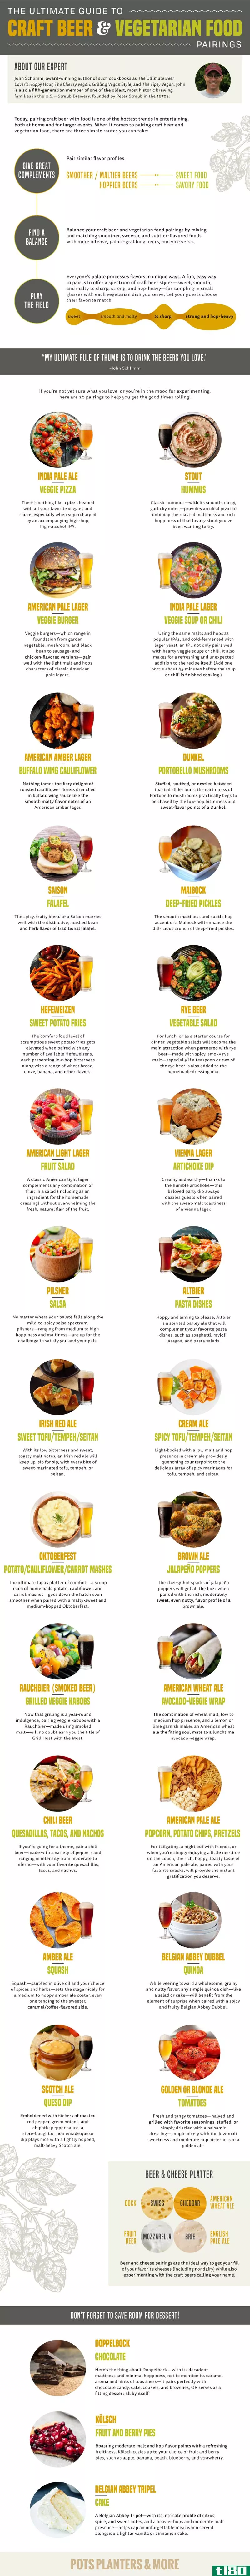 Illustration for article titled Perfectly Pair Craft Beer With Vegetarian Cuisine Using This Handy Guide